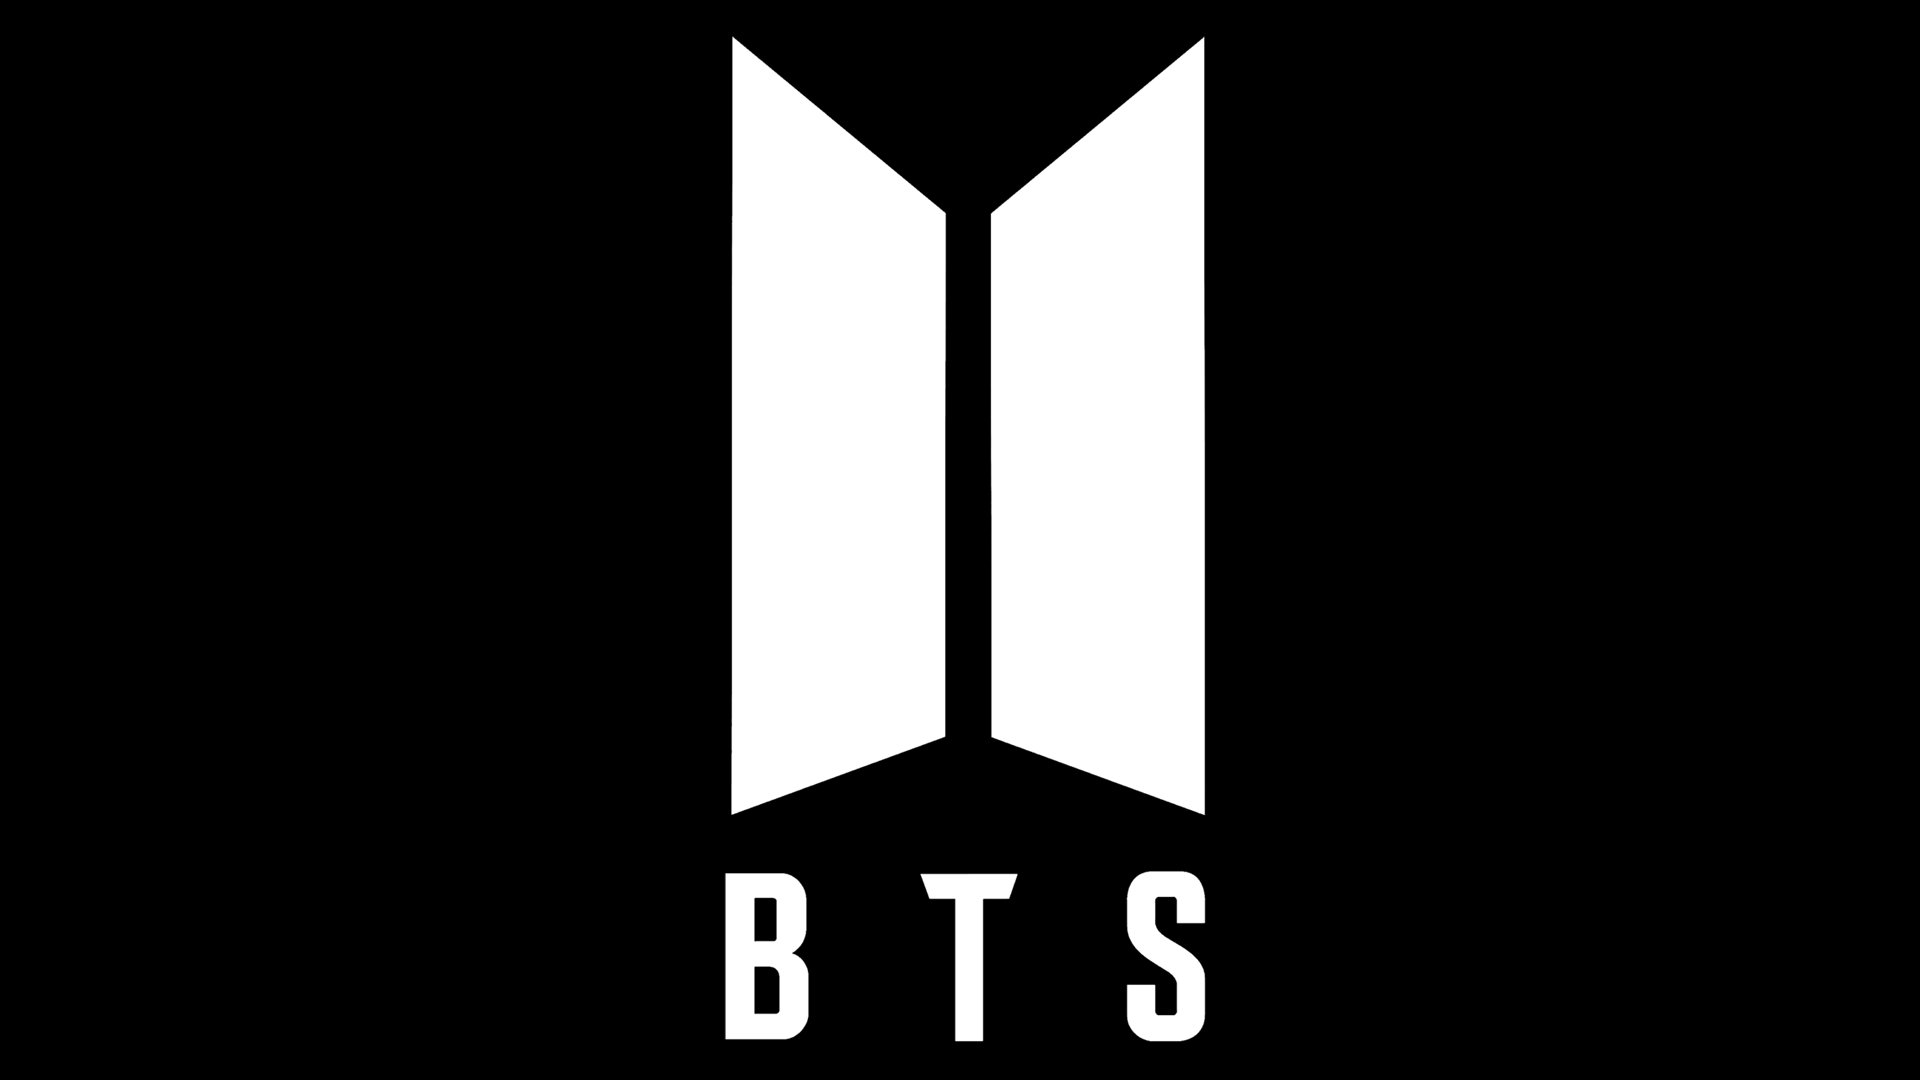 BTS Logo, symbol meaning, History and Evolution1920 x 1080